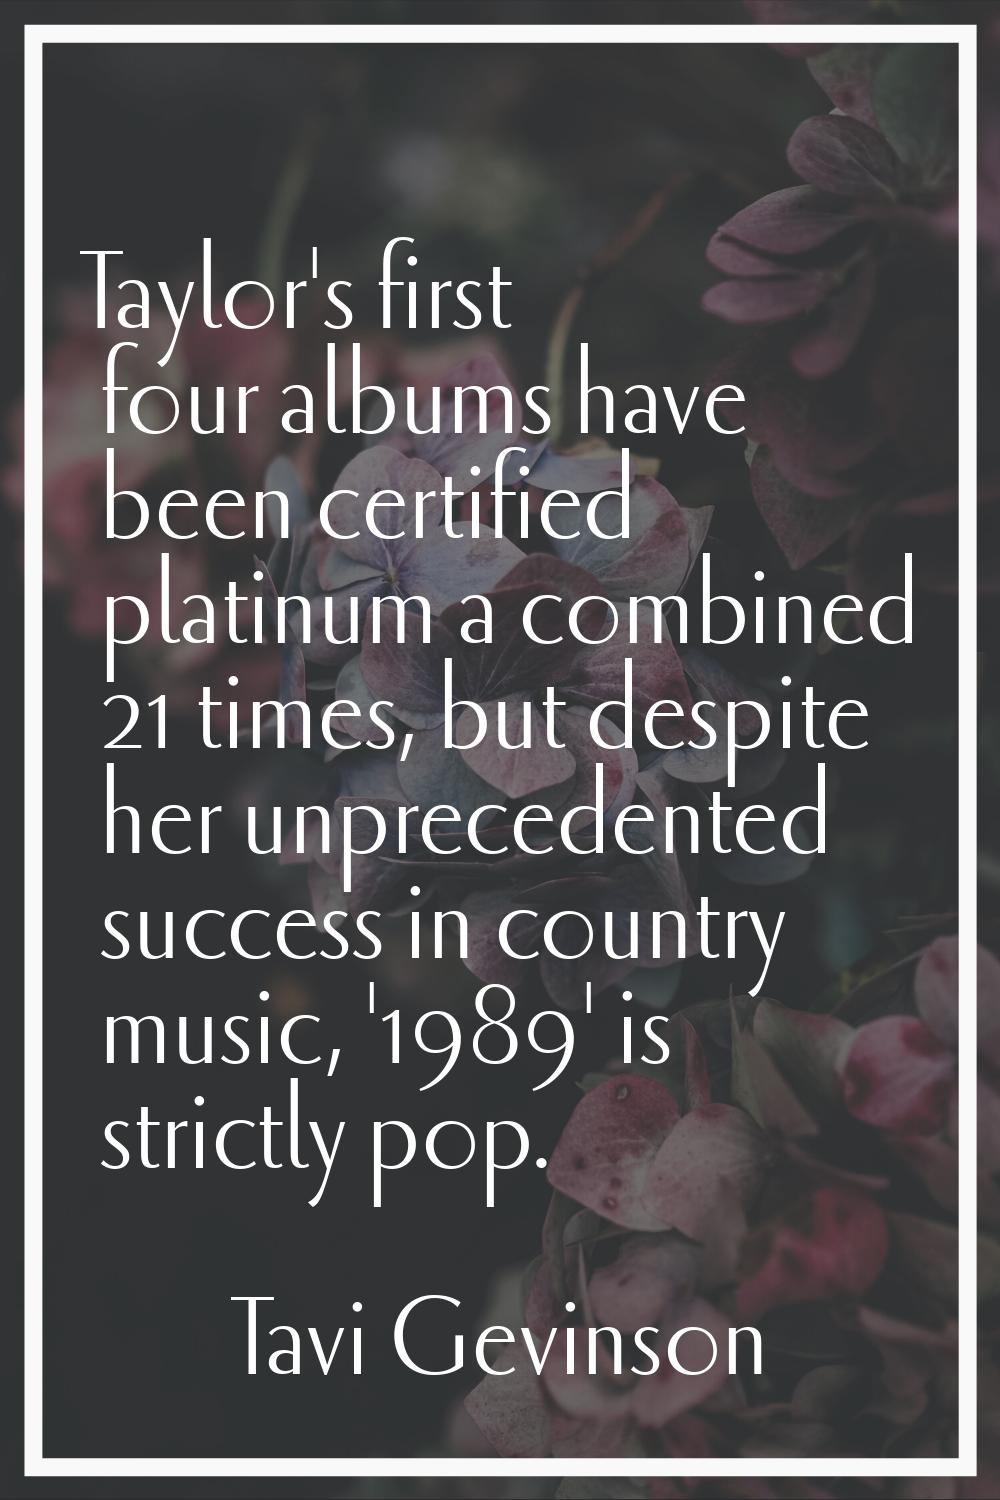 Taylor's first four albums have been certified platinum a combined 21 times, but despite her unprec